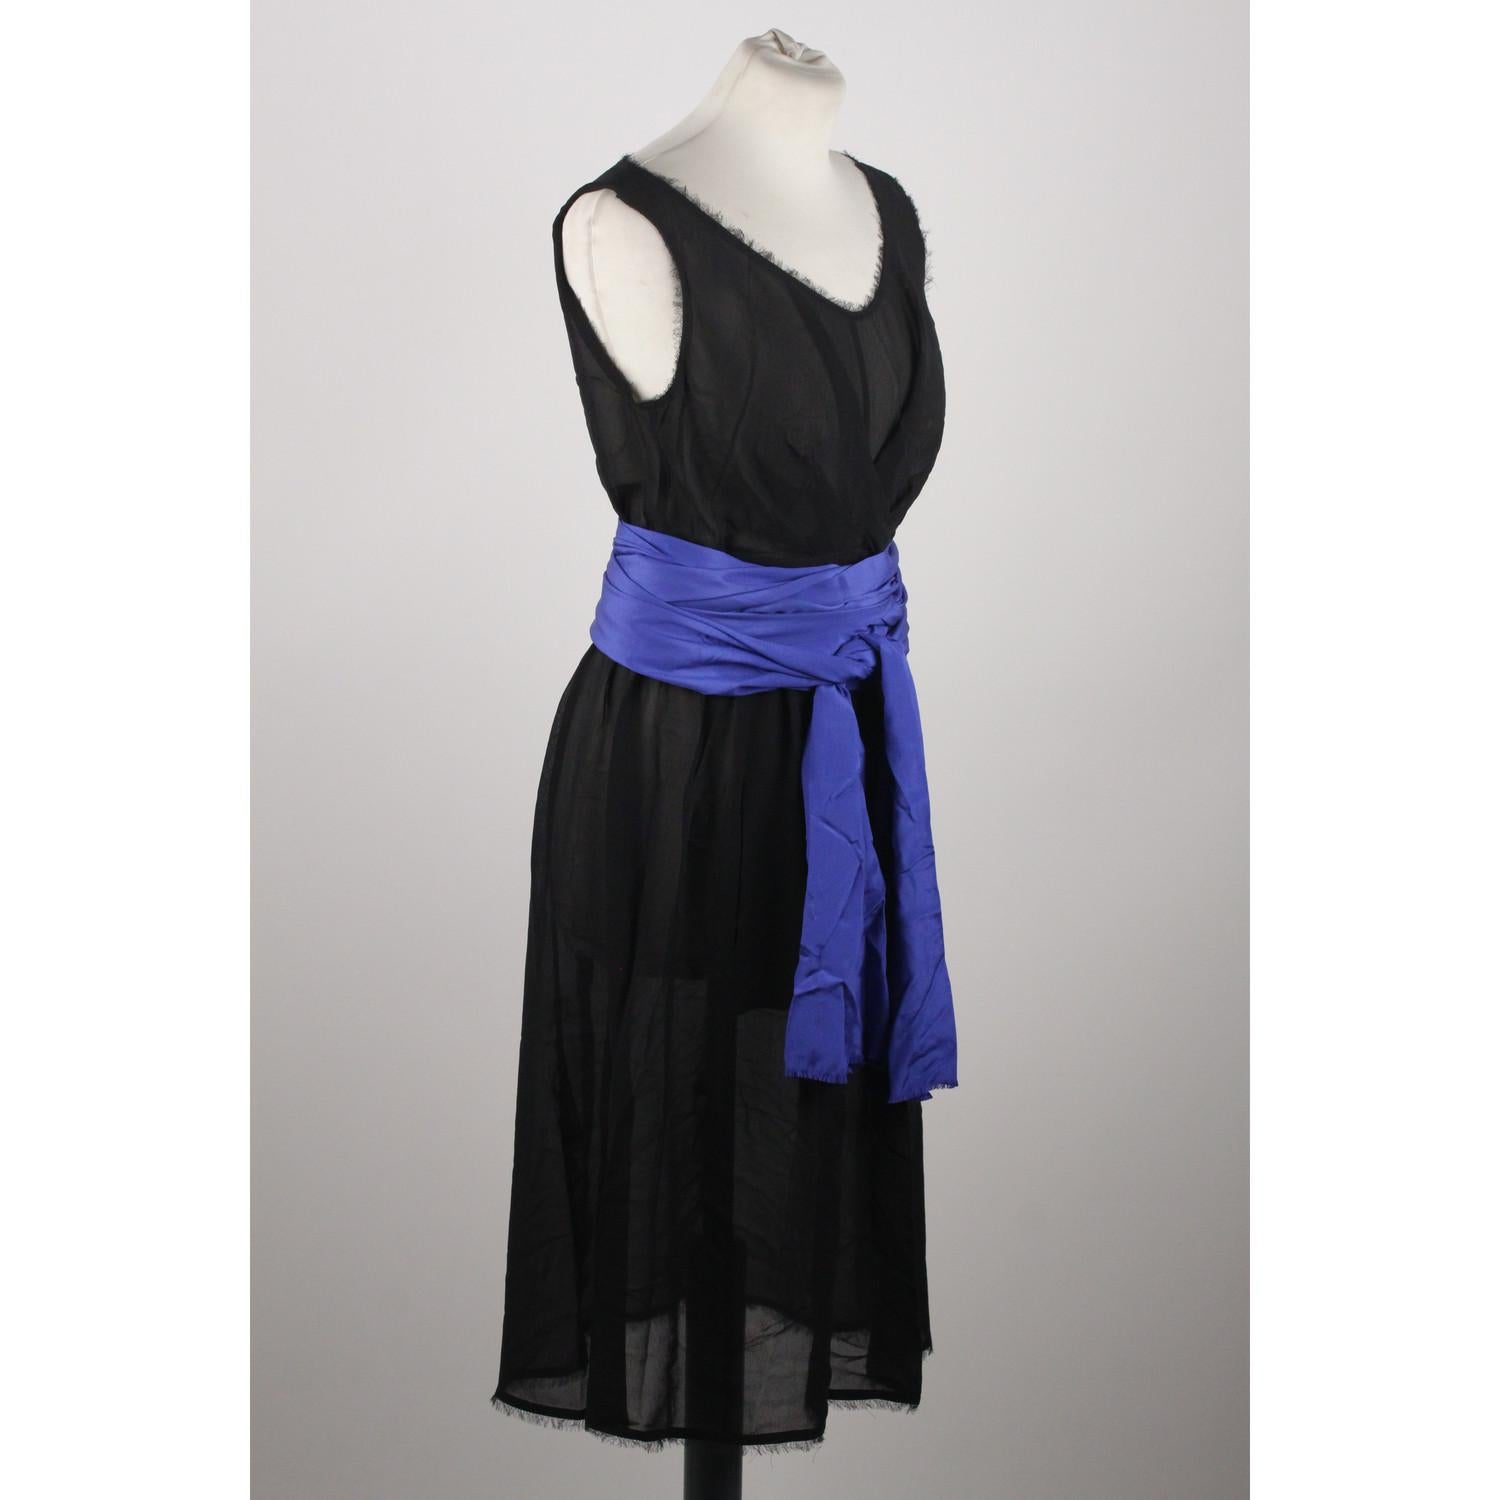 Fendi Black Silk Sleeveless Dress with Blue Belt Size 44 IT In Good Condition In Rome, Rome